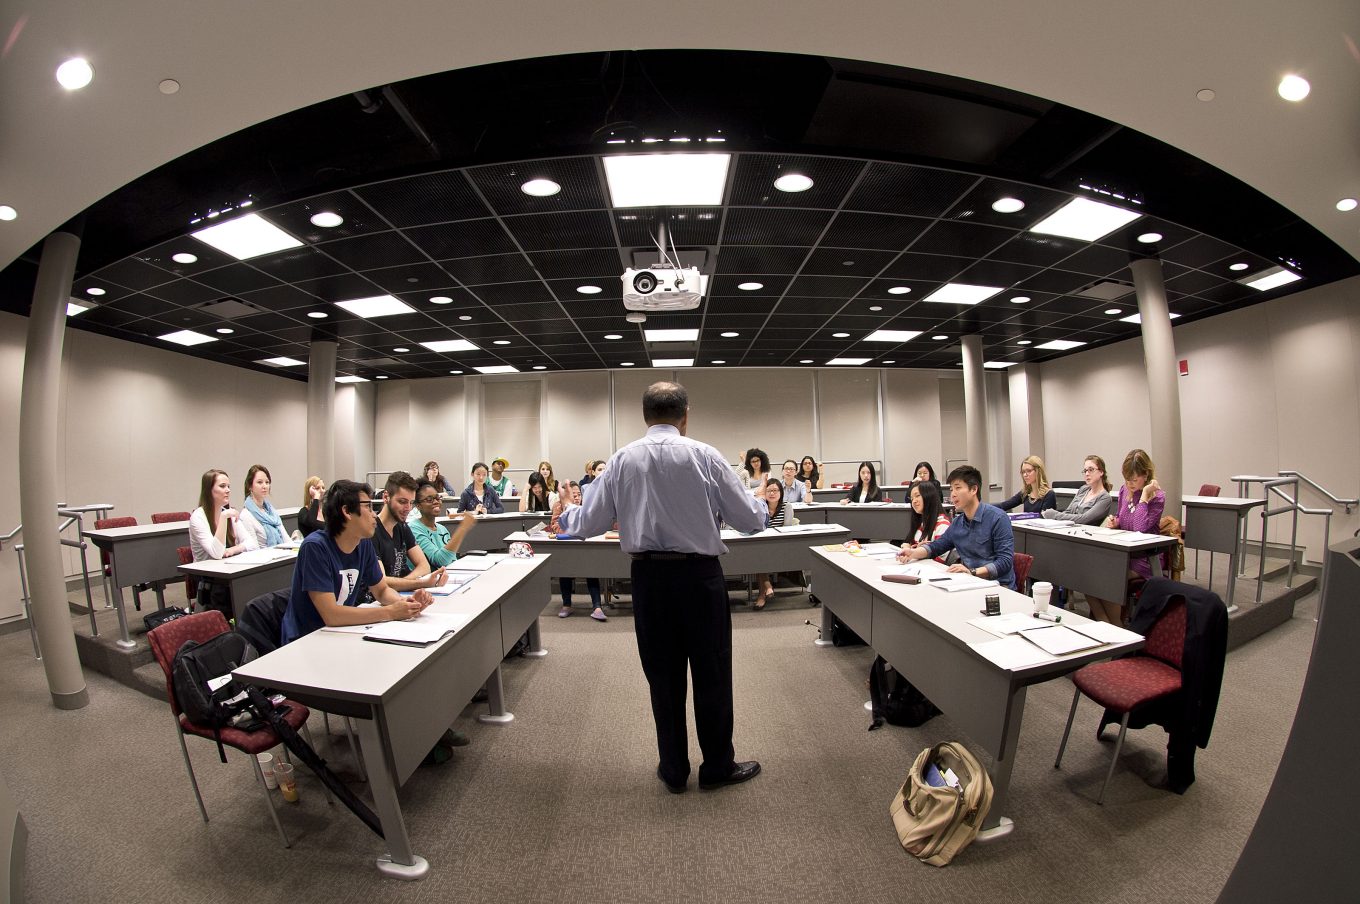 A professor standing in front of a classroom delivering a lecture to students